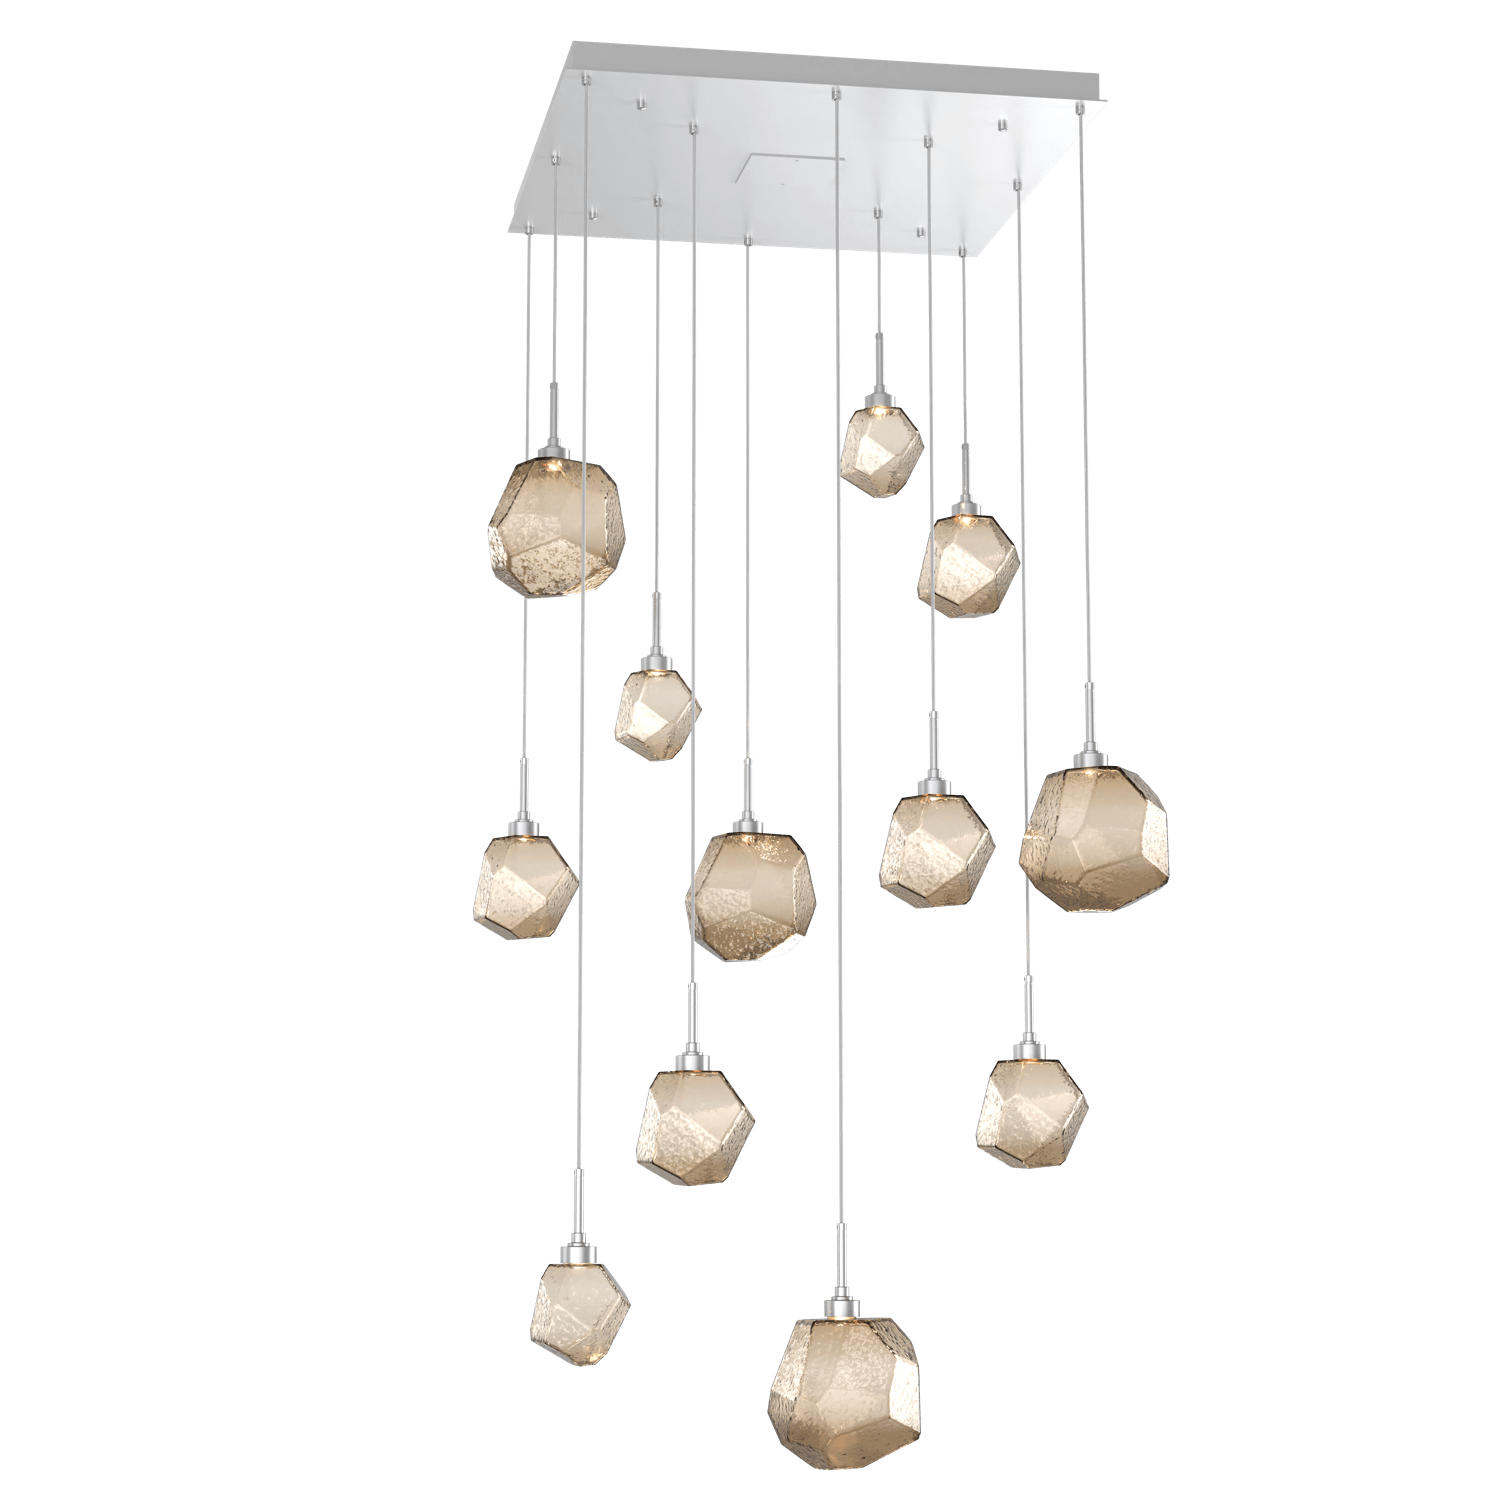 CHB0039-12-CS-B-Hammerton-Studio-Gem-12-light-square-pendant-chandelier-with-classic-silver-finish-and-bronze-blown-glass-shades-and-LED-lamping